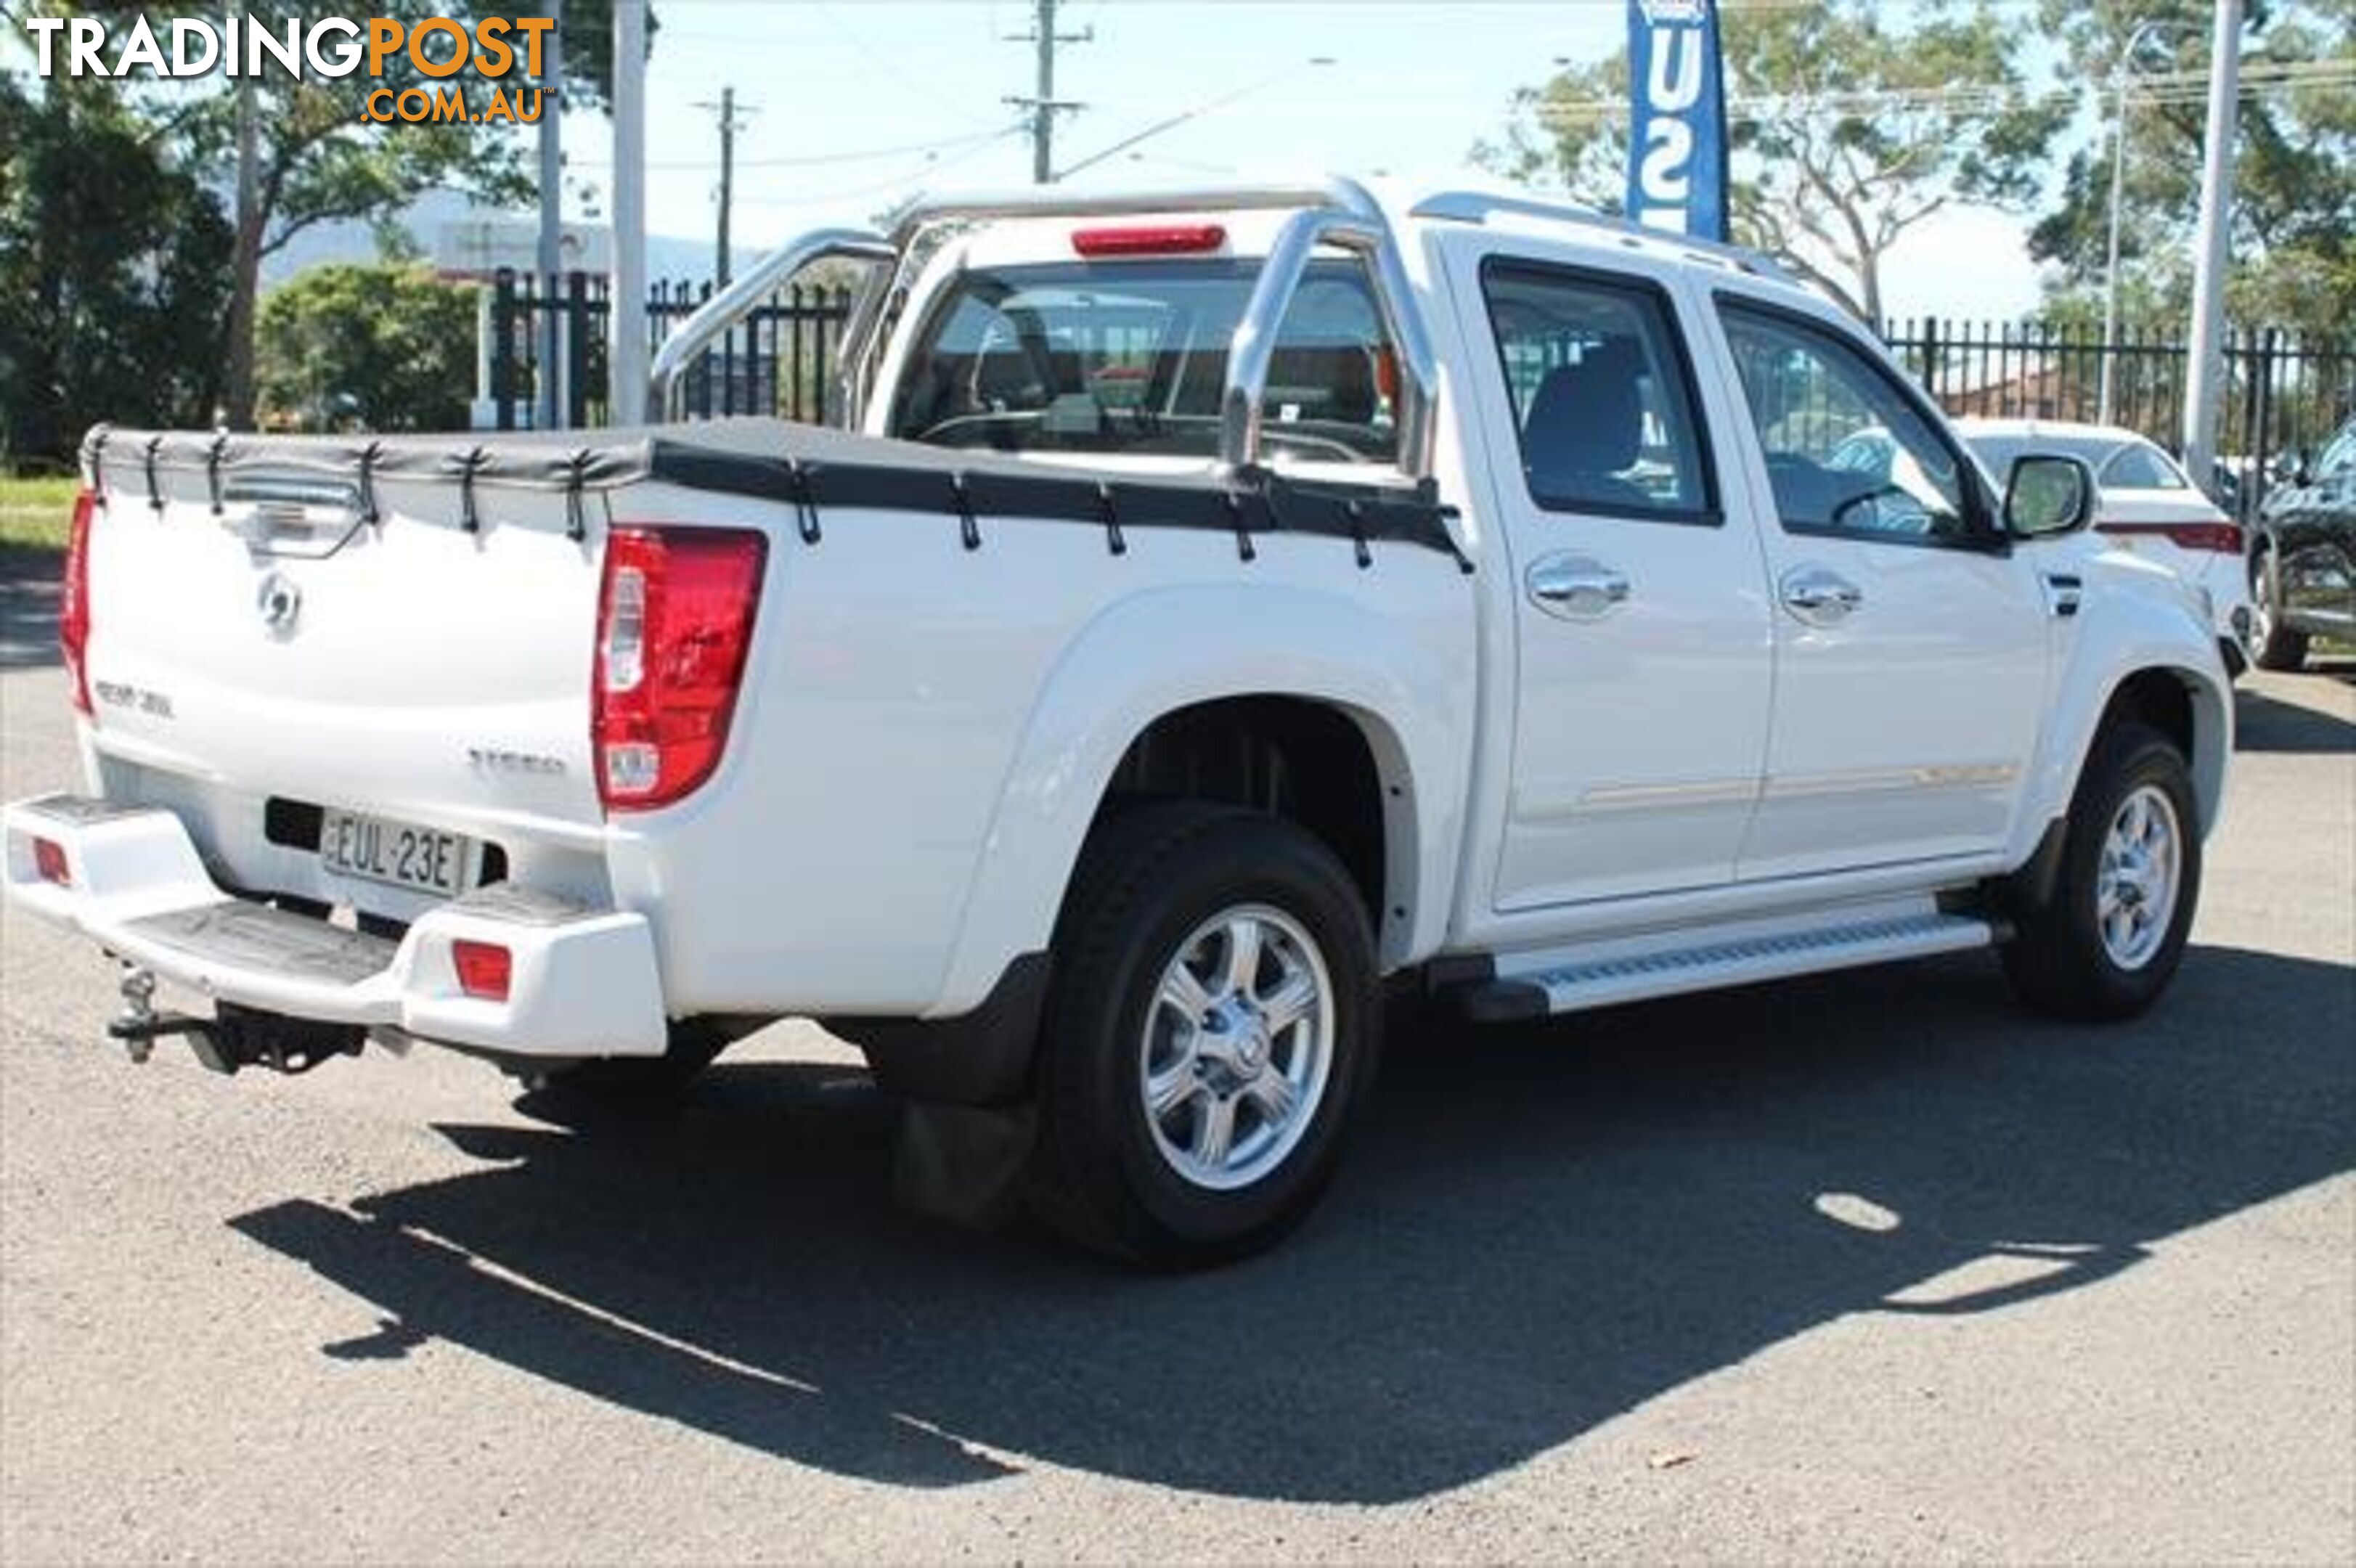 2020 GREAT WALL STEED  NBP UTILITY - DUAL CAB